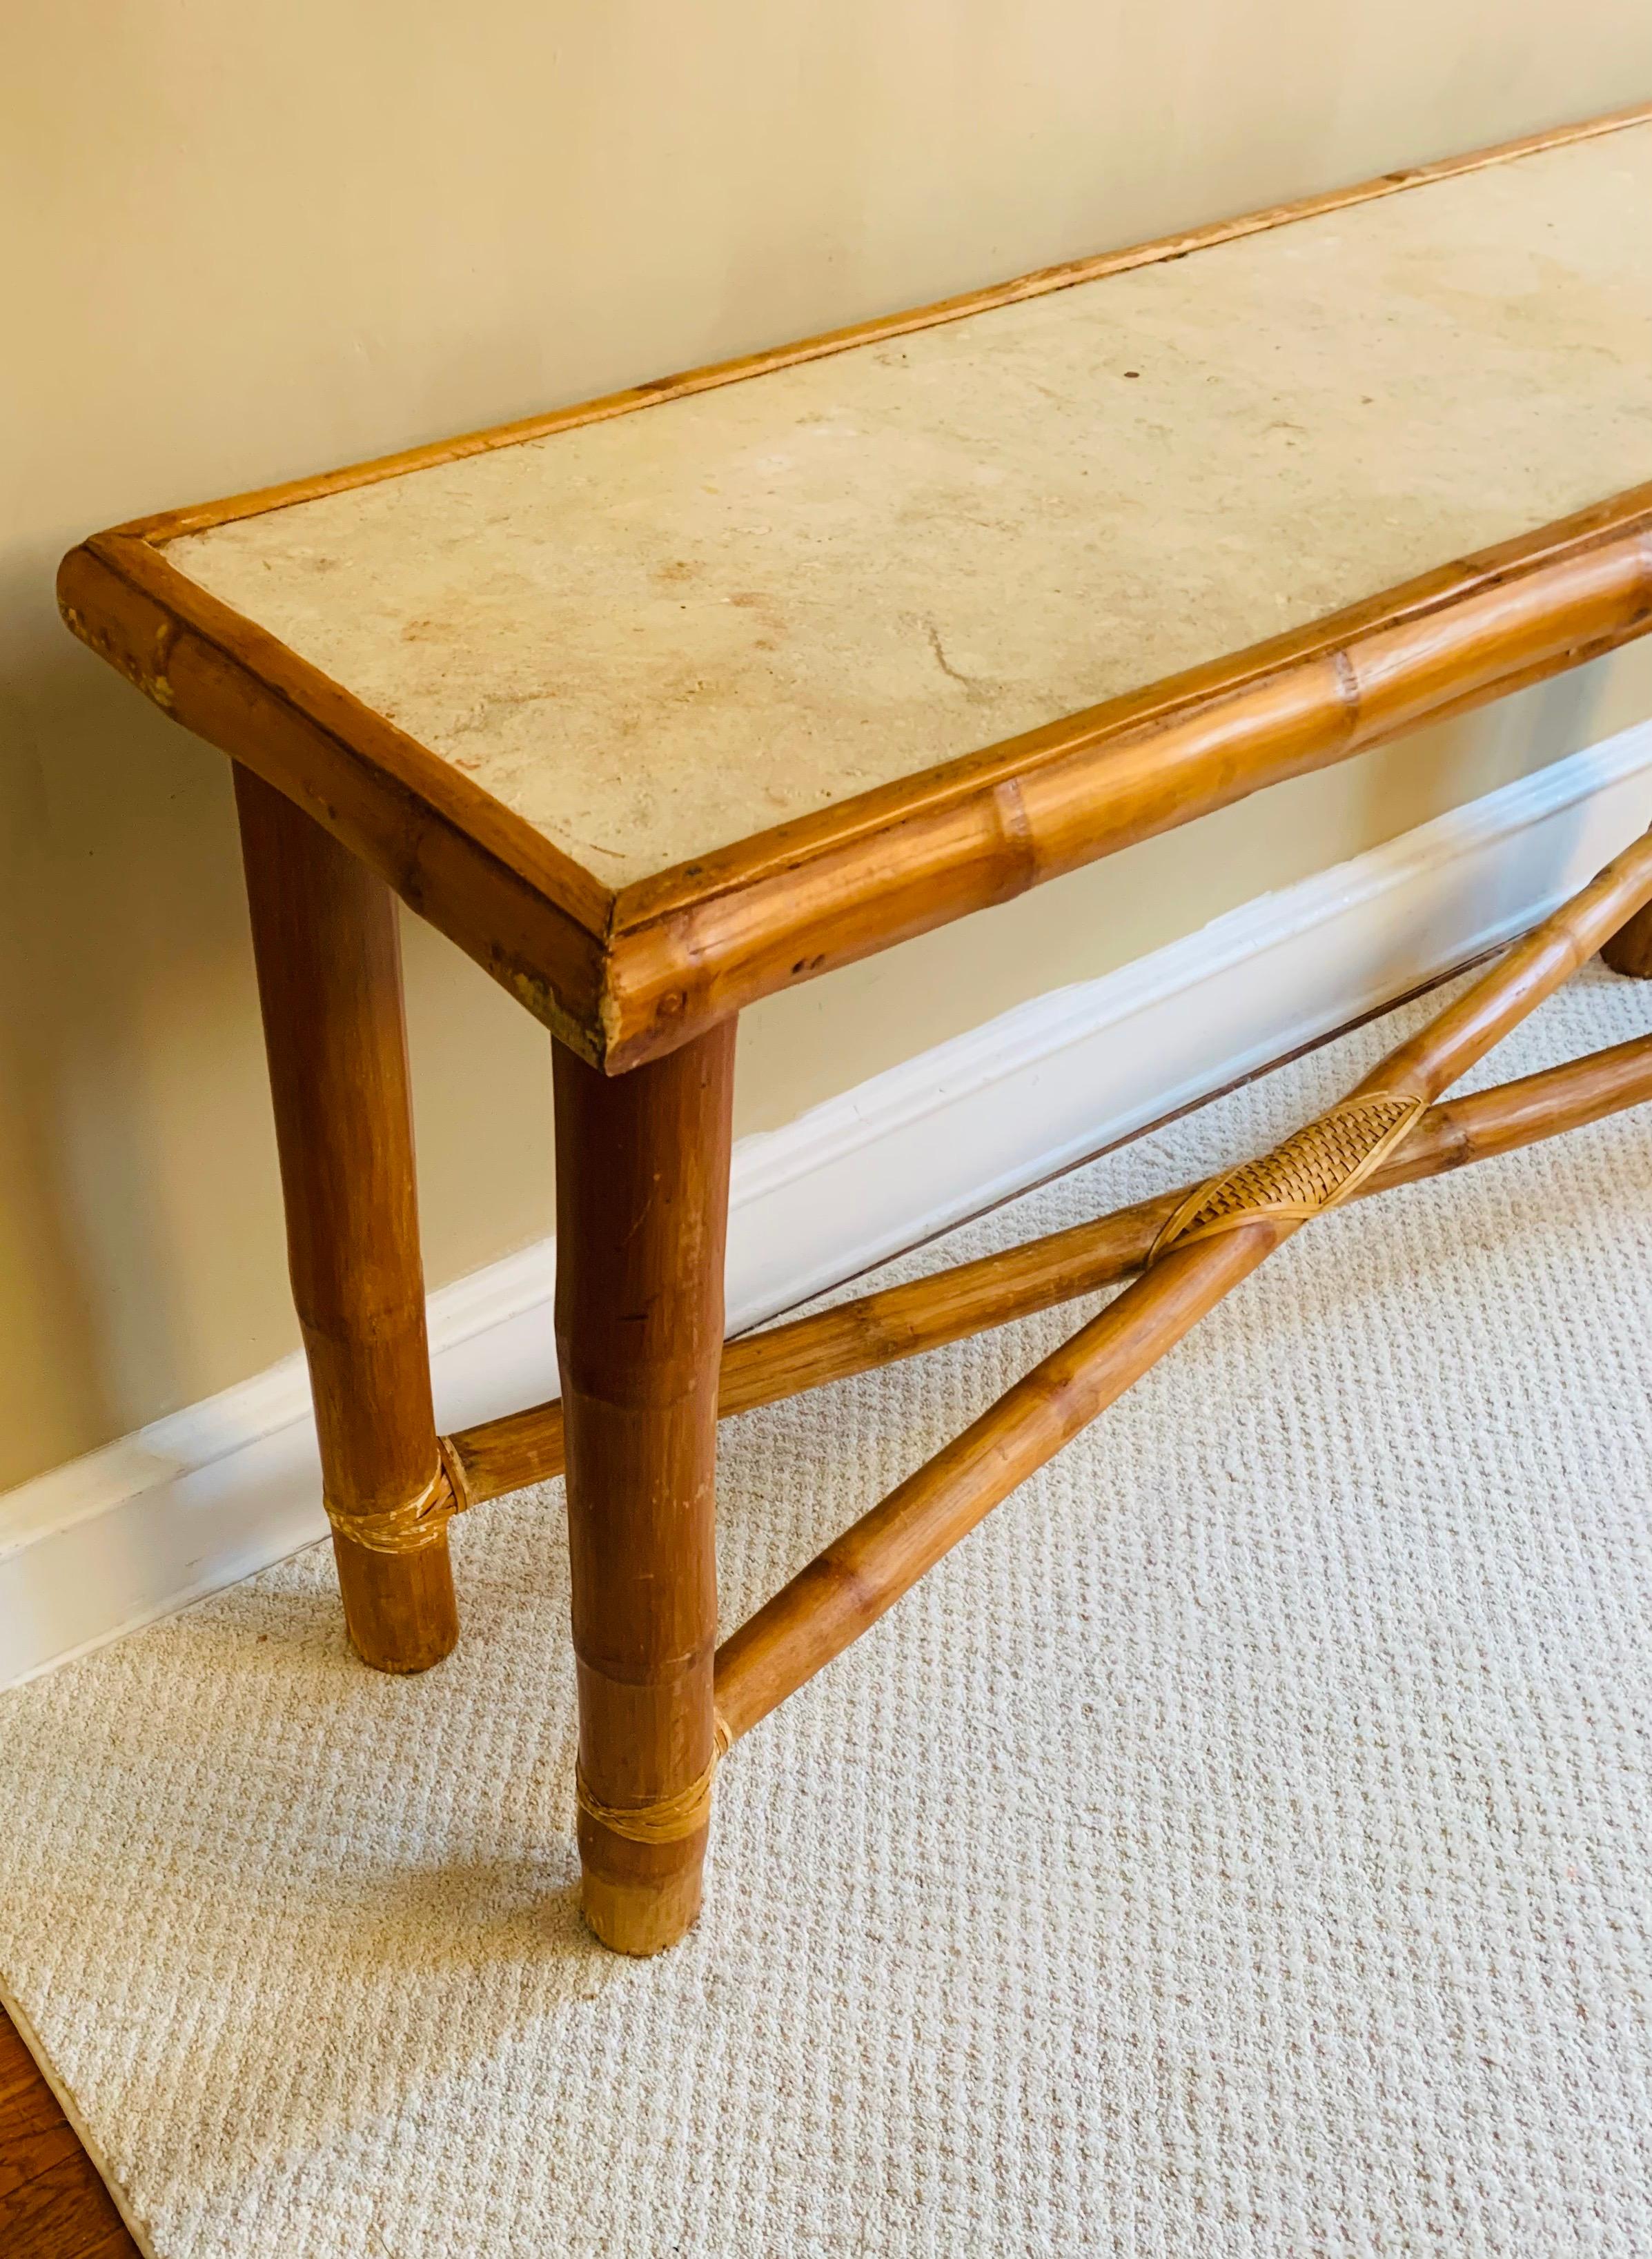 Thick substantial console table in natural-hued bamboo.

Expertly made, presumably in Burma by the thick bamboo that was used.

Raw stone top, time-worn beautifully to retain a rustic look.

It’s a sturdy, strong piece.